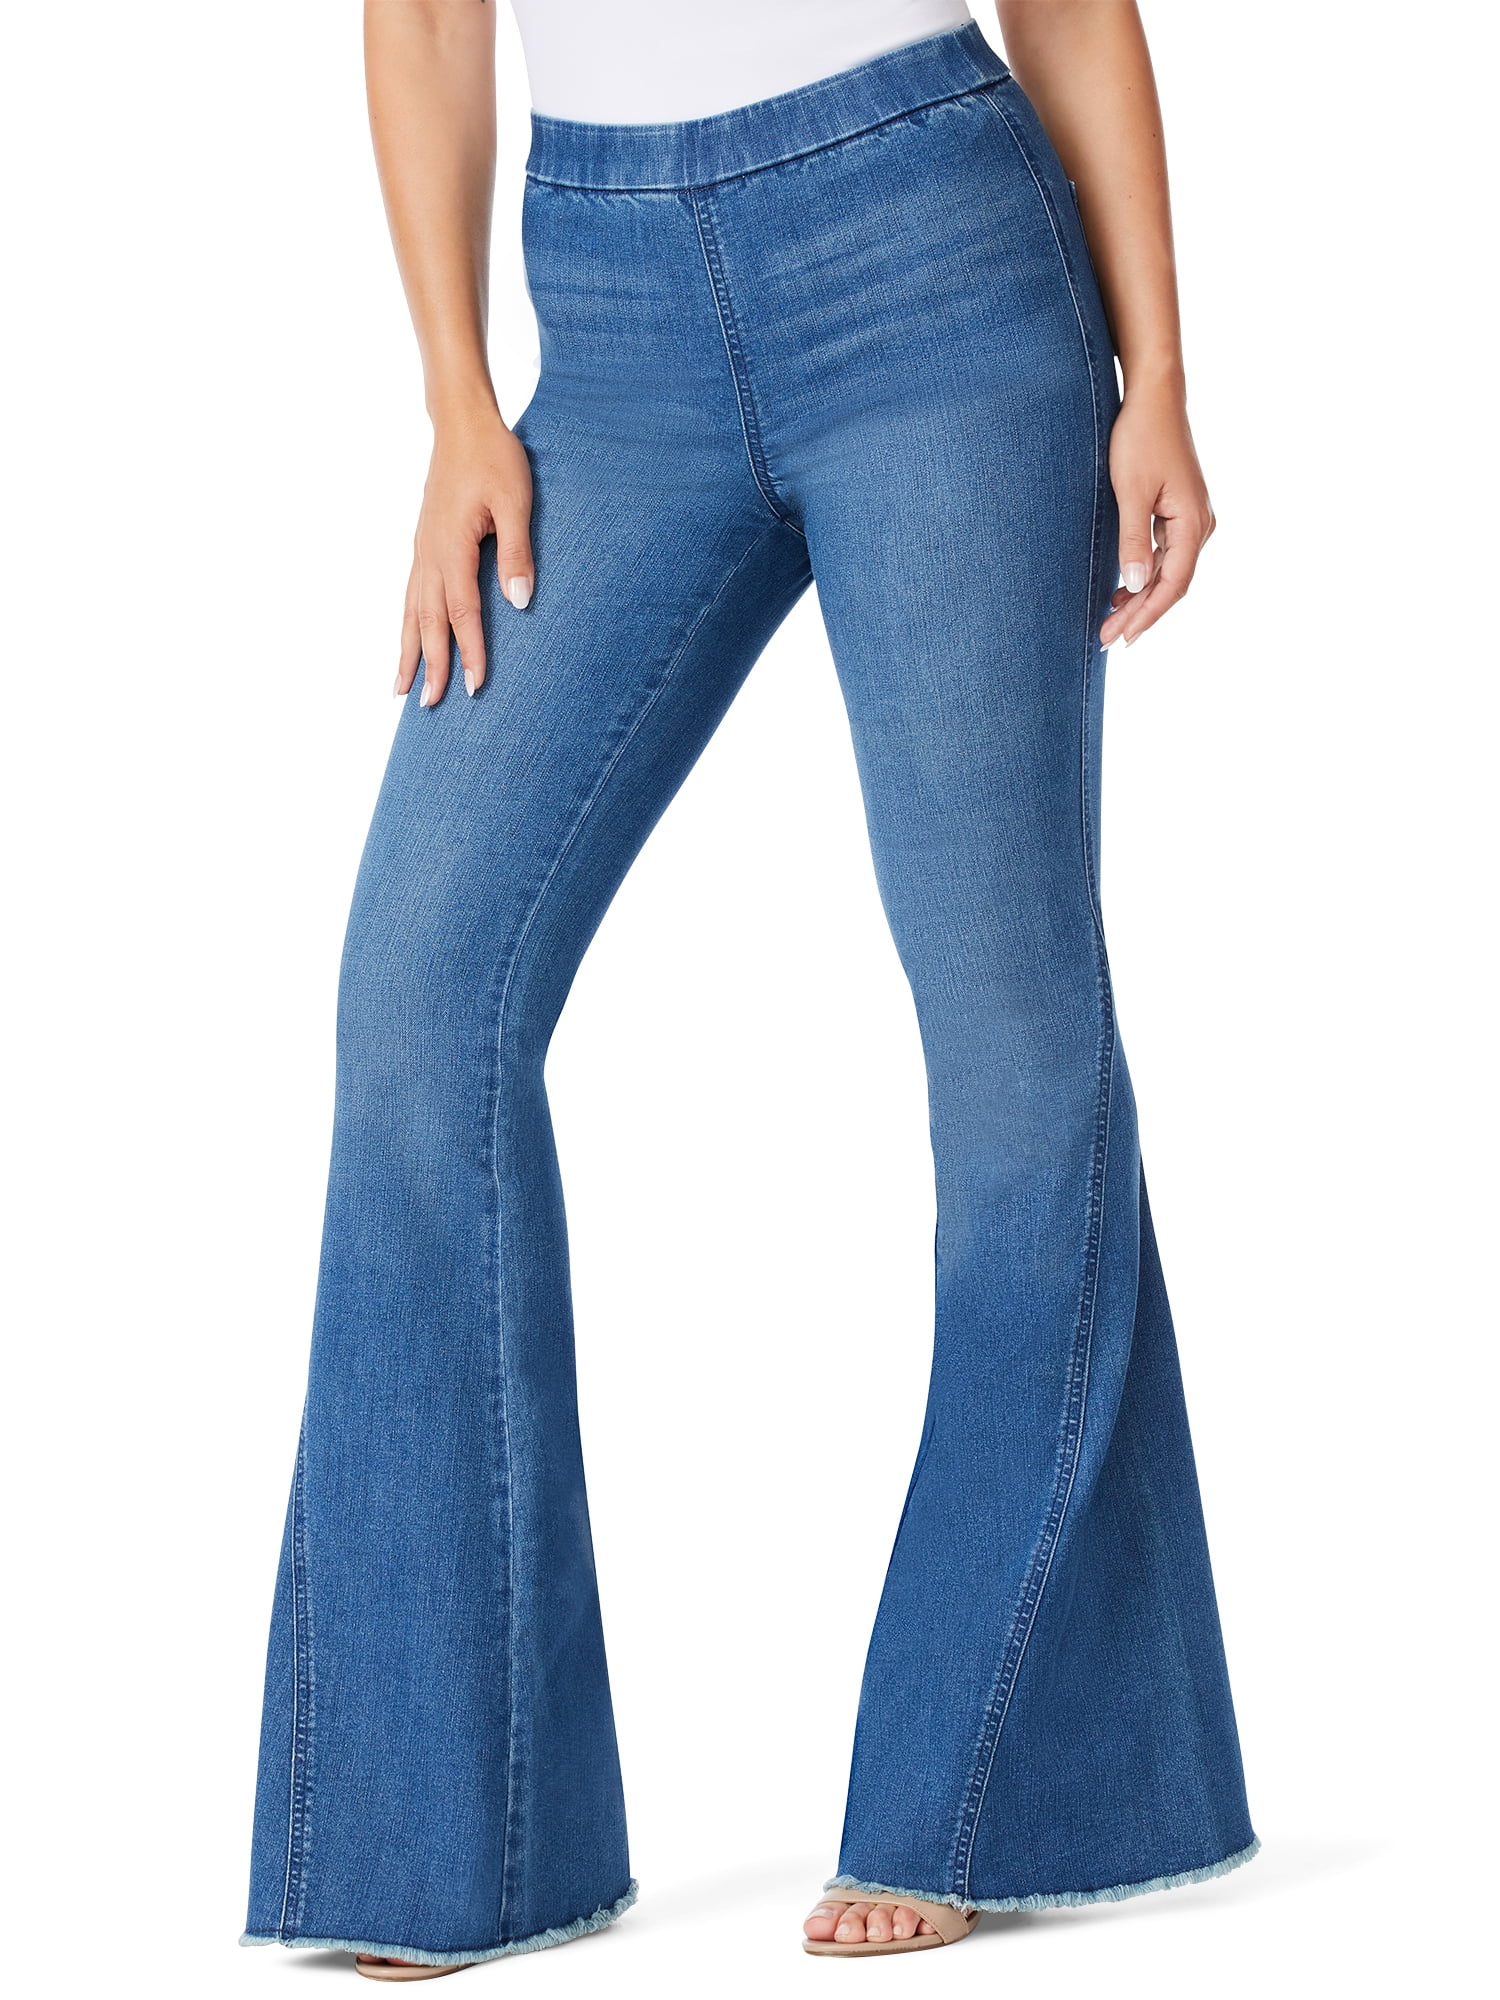 Sofia Jeans Women's Melisa Super Flare High Rise Pull On Jeans 